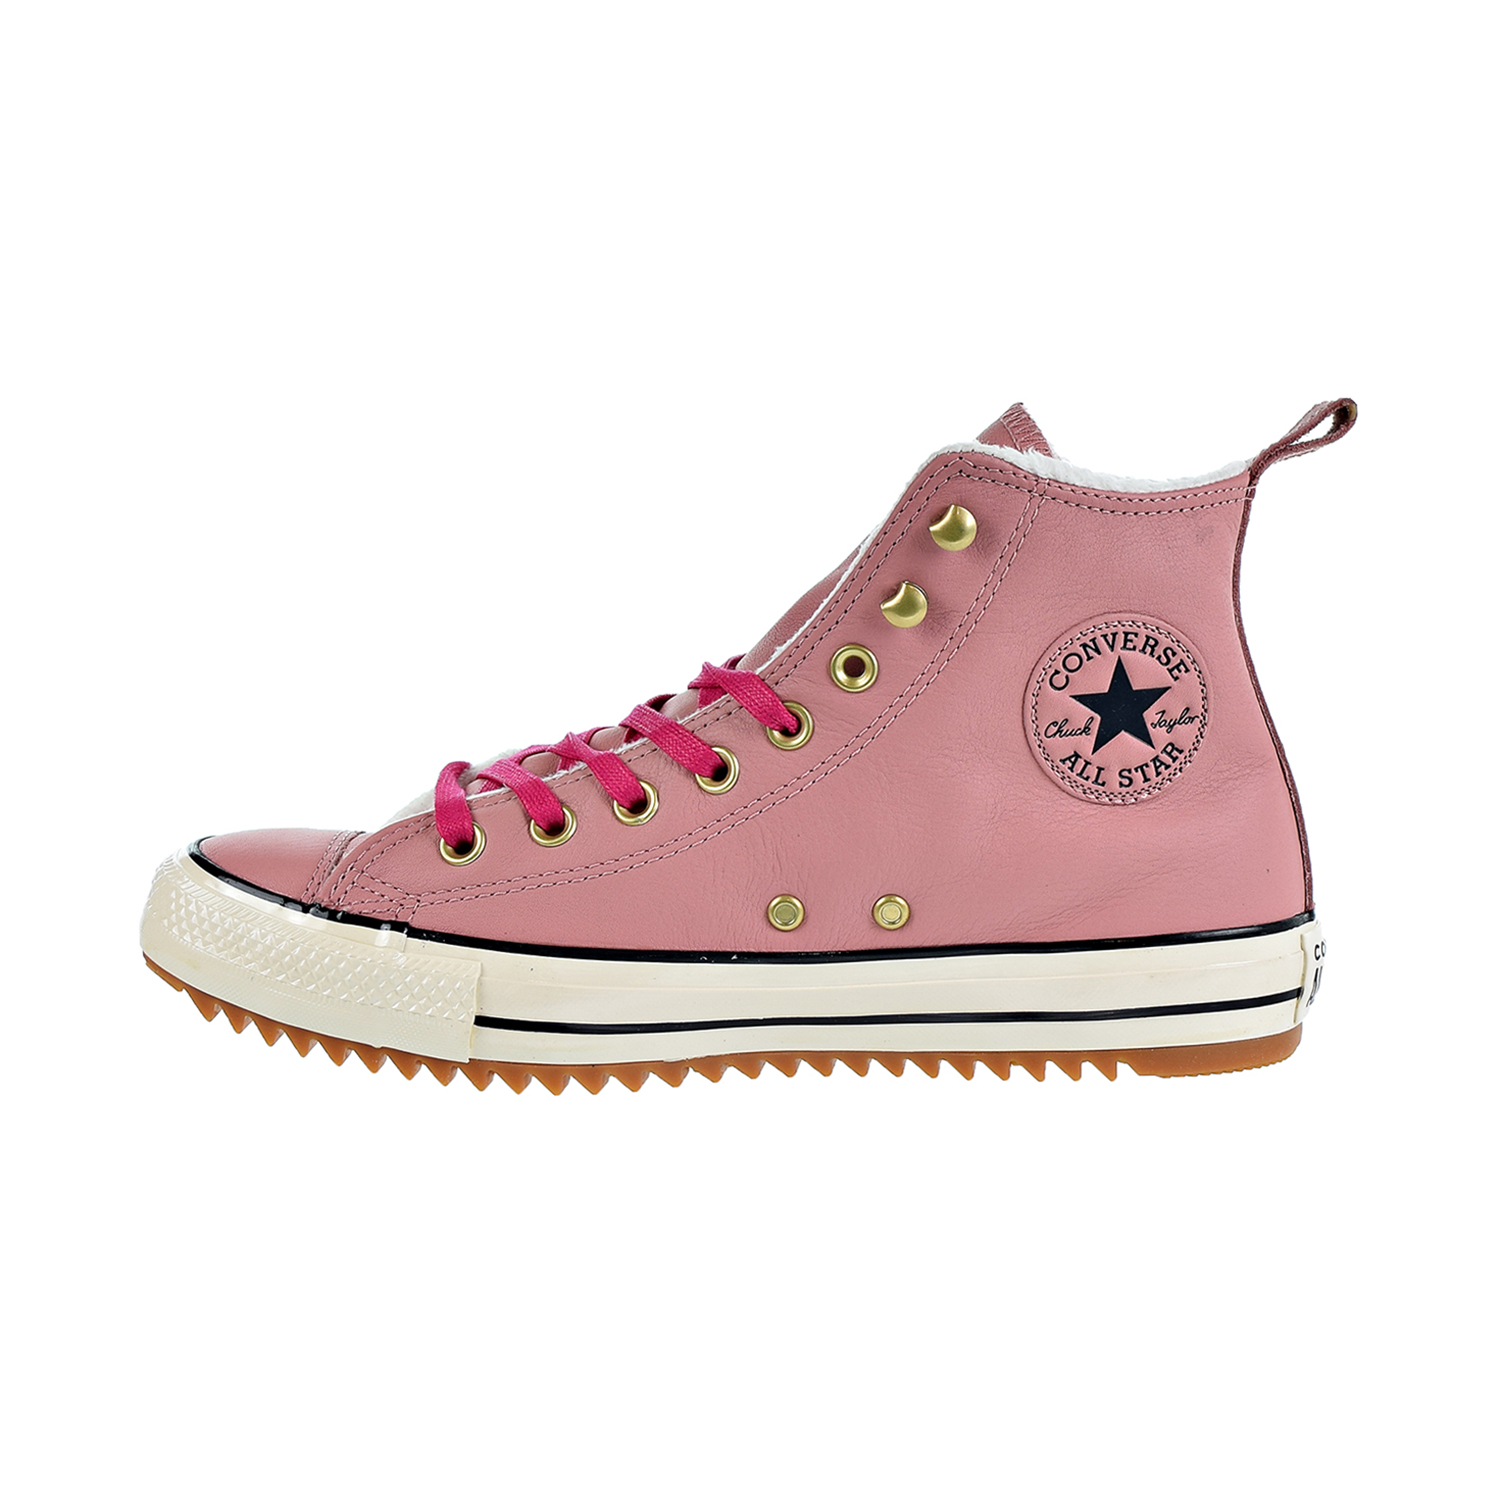 Converse Chuck Taylor All Star Hiker Boot Hi Unisex Sneakers Rust Pink-Pink Pop 162477c - image 4 of 6